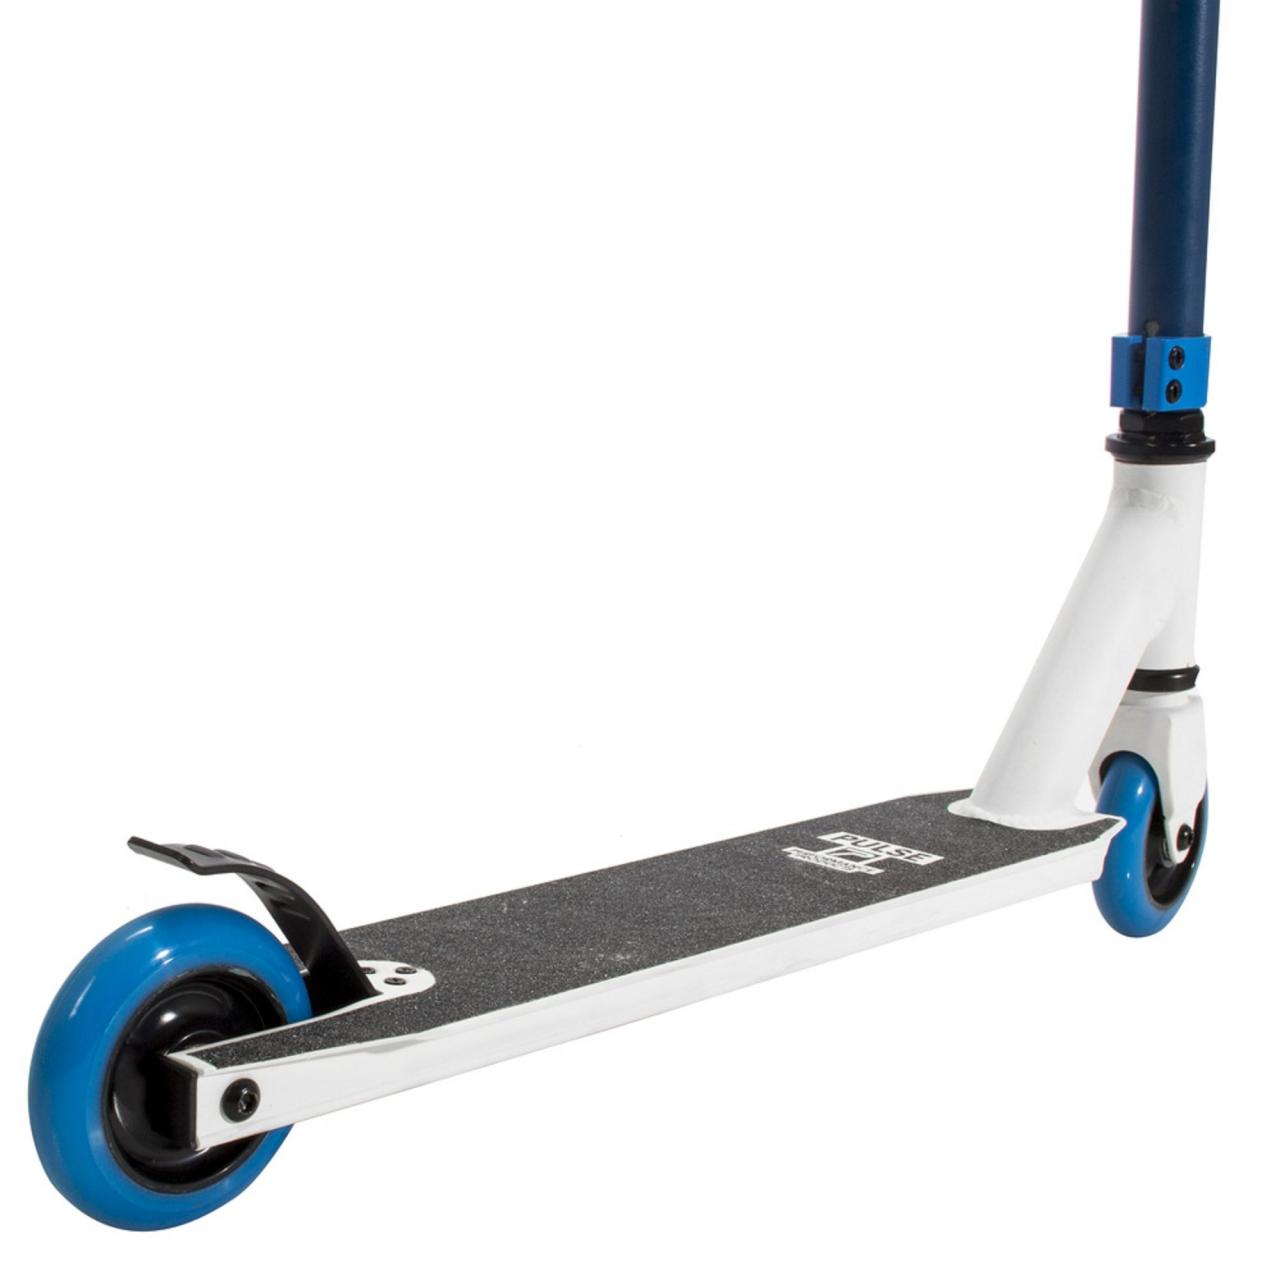 Pulse Performance Products KR2 Freestyle Scooter - Beginner Kick Pro Scooter  for Kids - Blue : Amazon.sg: Sporting Goods